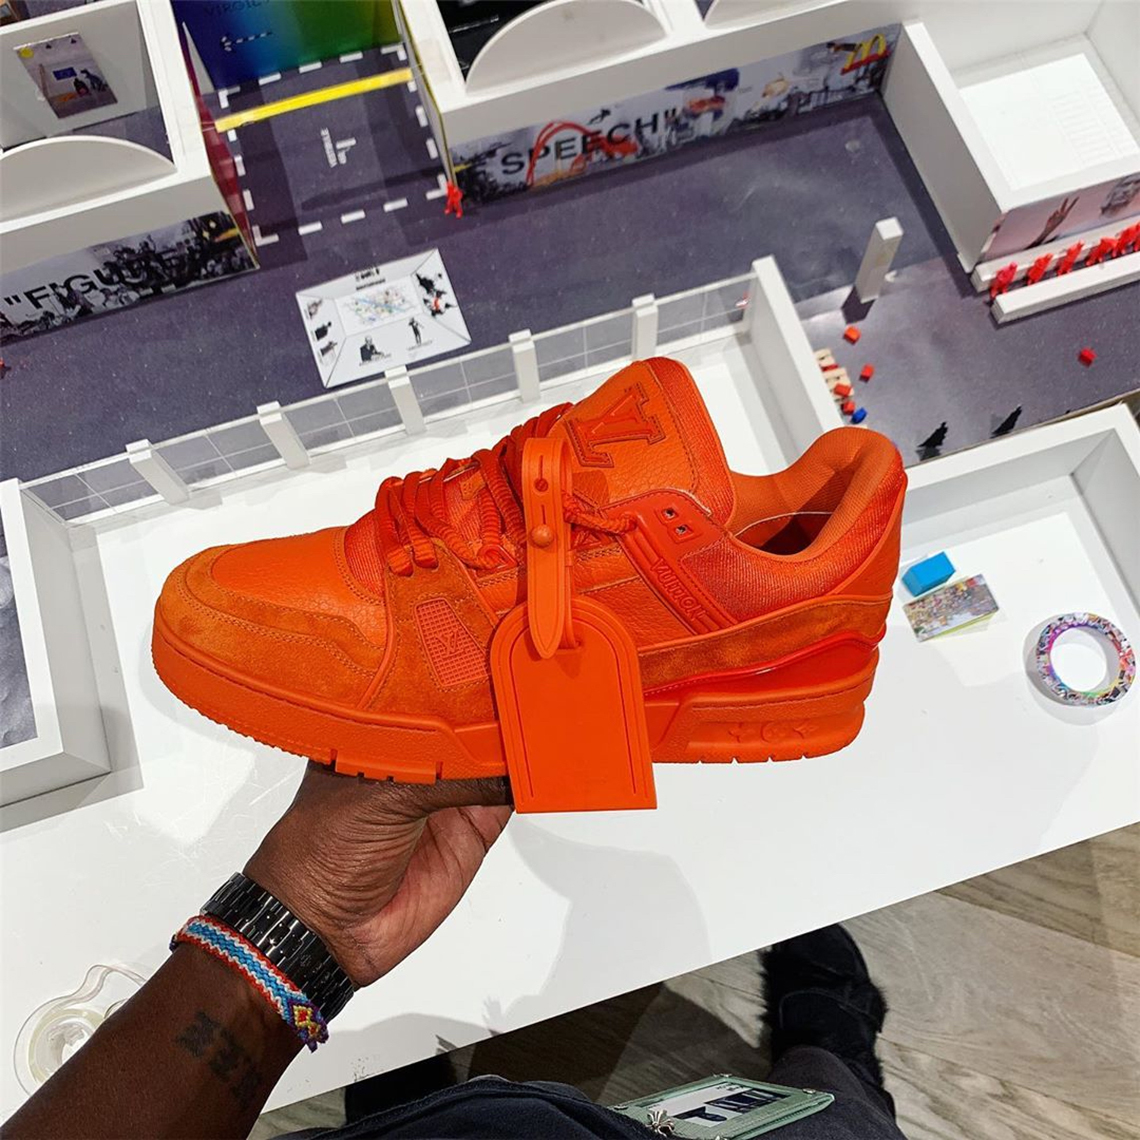 Virgil Abloh Designed and Signed Louis Vuitton LV I RED Trainer  Prototype  By Virgil  Louis Vuitton  RED  2021  Sothebys